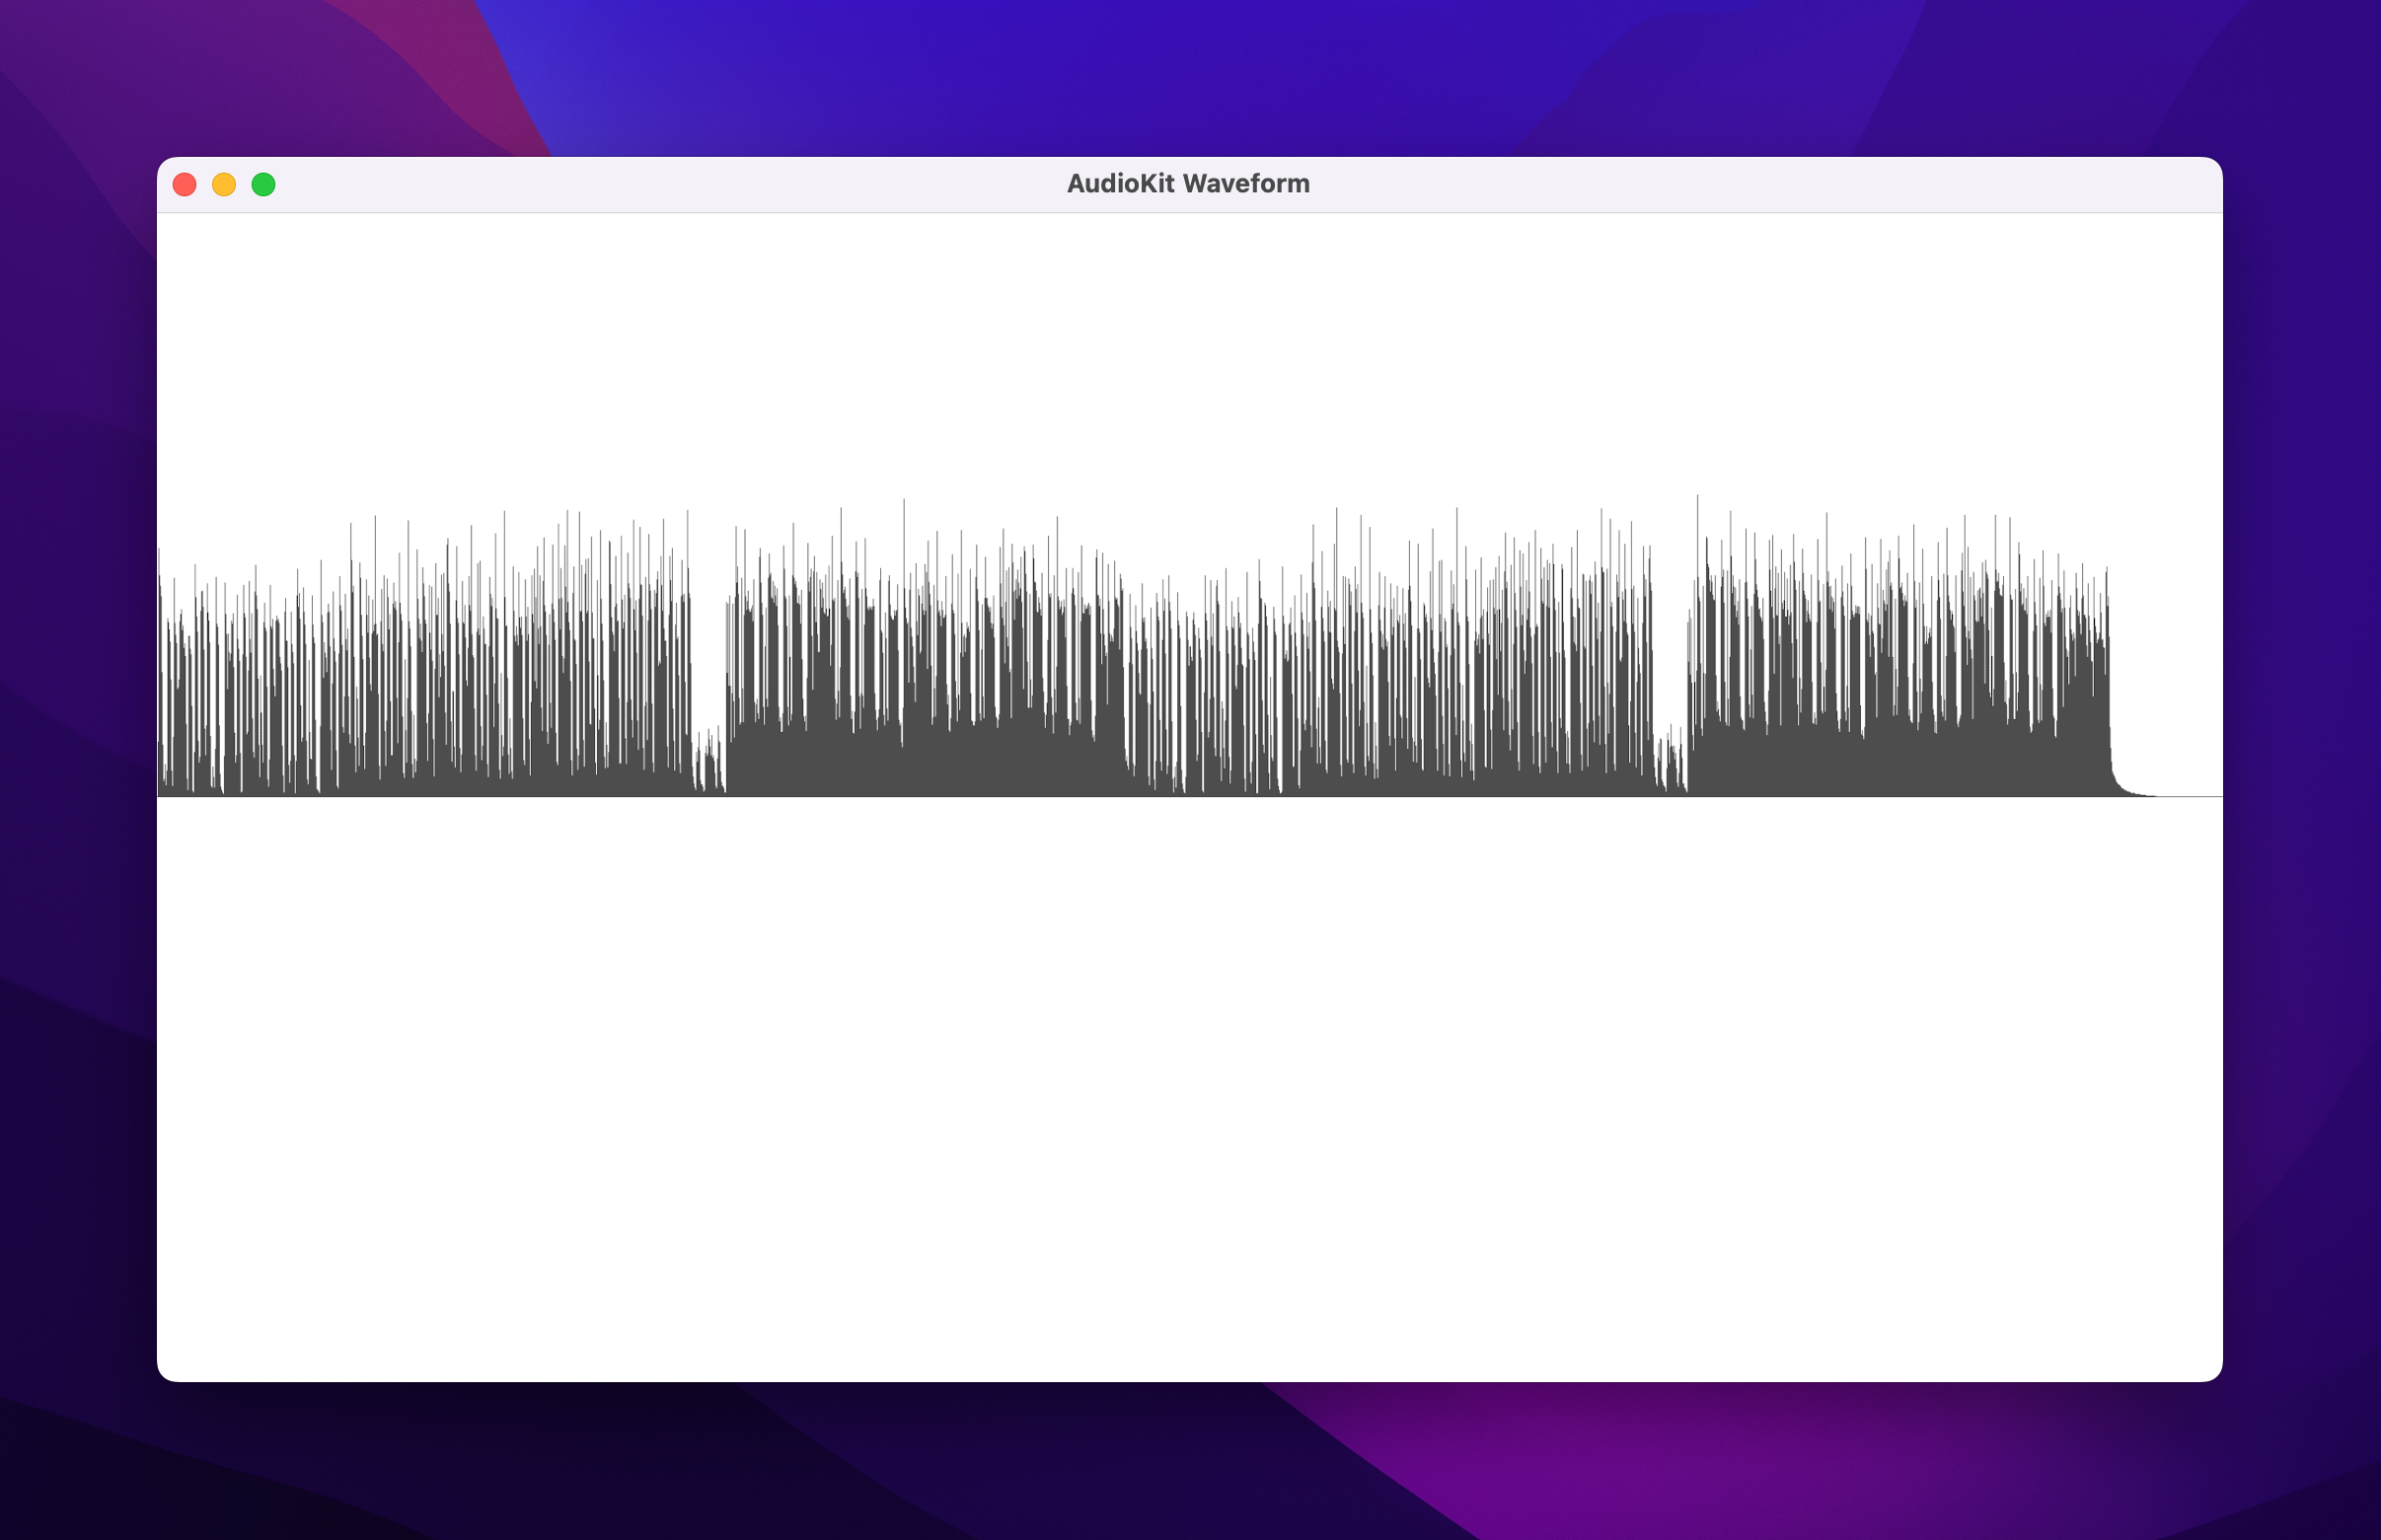 An image displaying the waveform drawn only for the top half